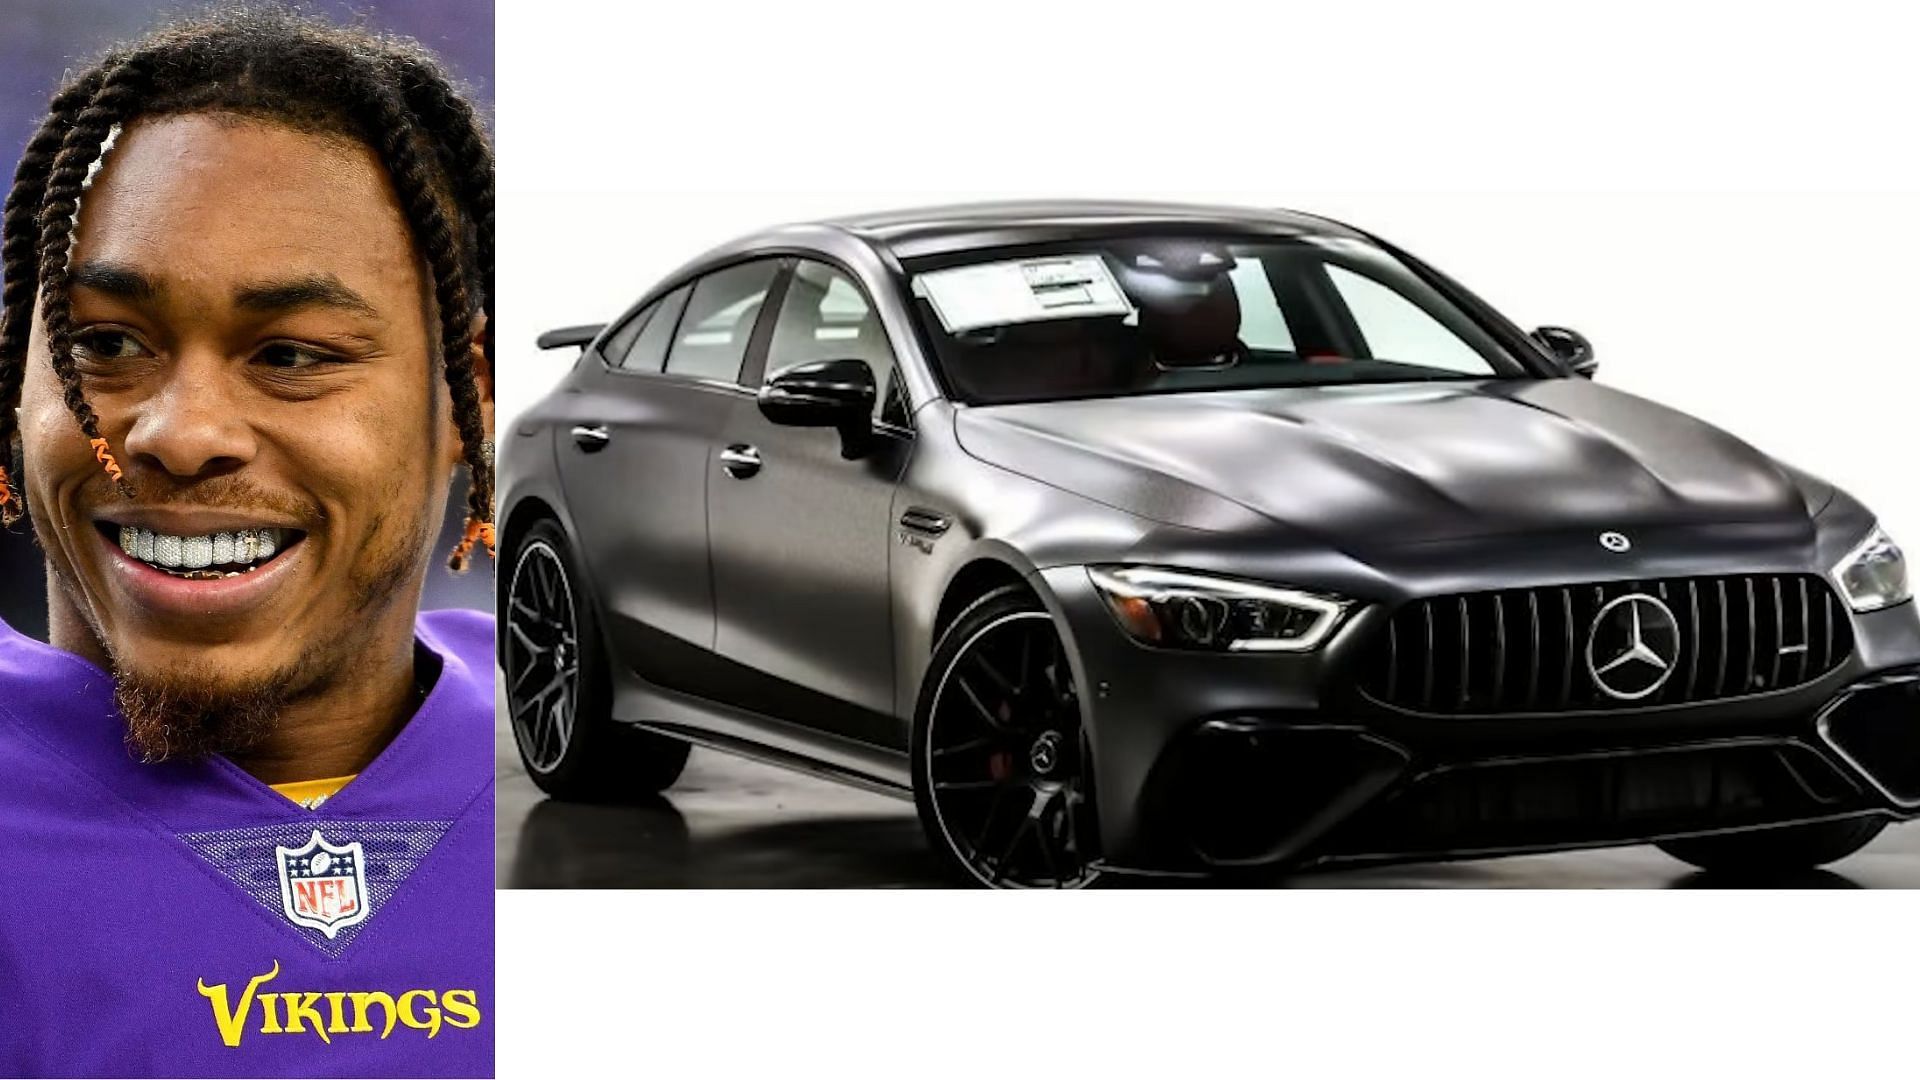 Minnesota Vikings wide receiver Justin Jefferson calls his $150,000 Mercedes AMG the &quot;Batmobile.&quot; (Image via: GQ Sports/YouTube)